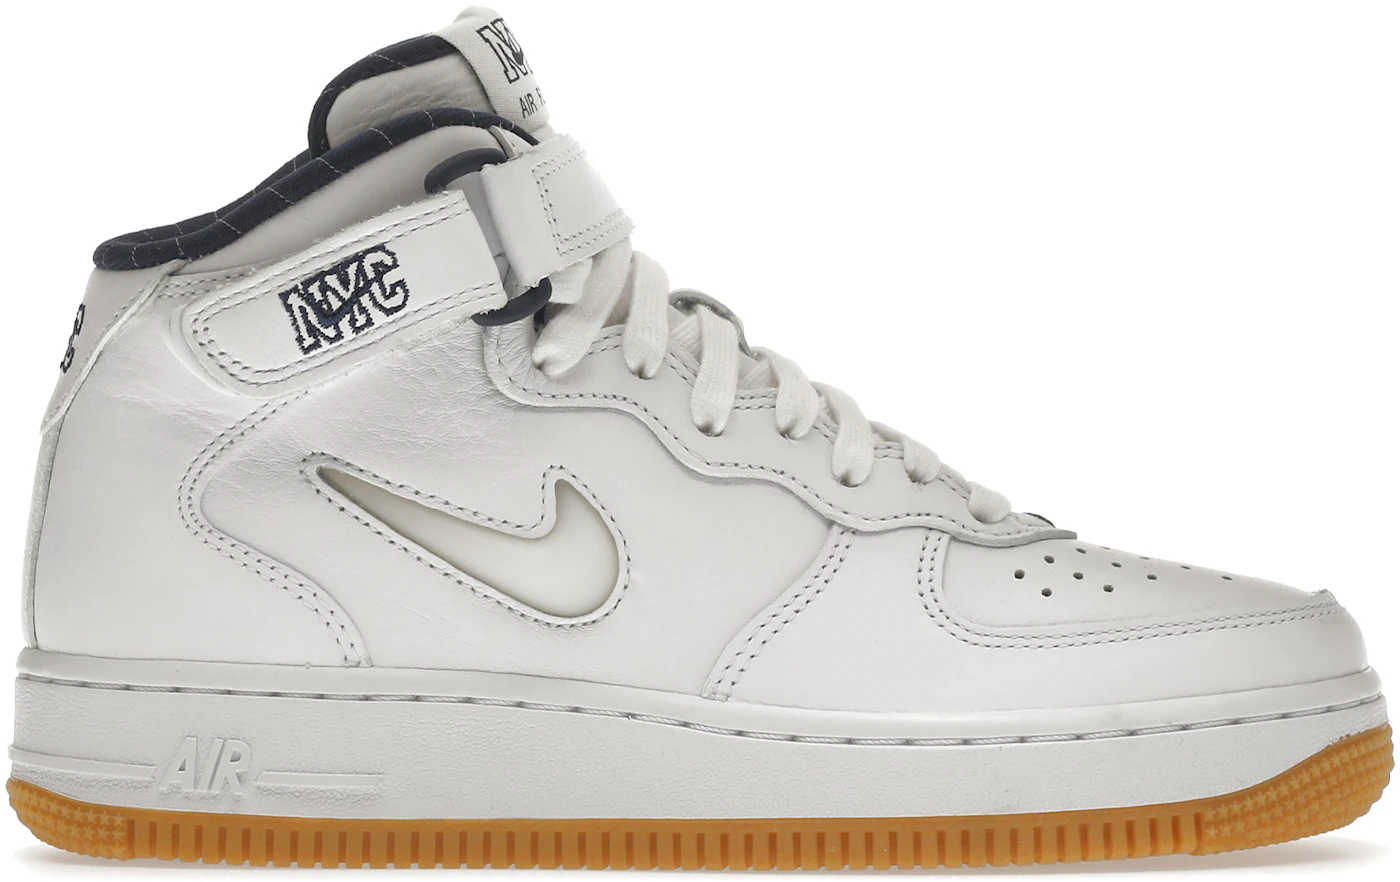 Nike Air Force 1 Mid NYC White - Size 8.5 Men